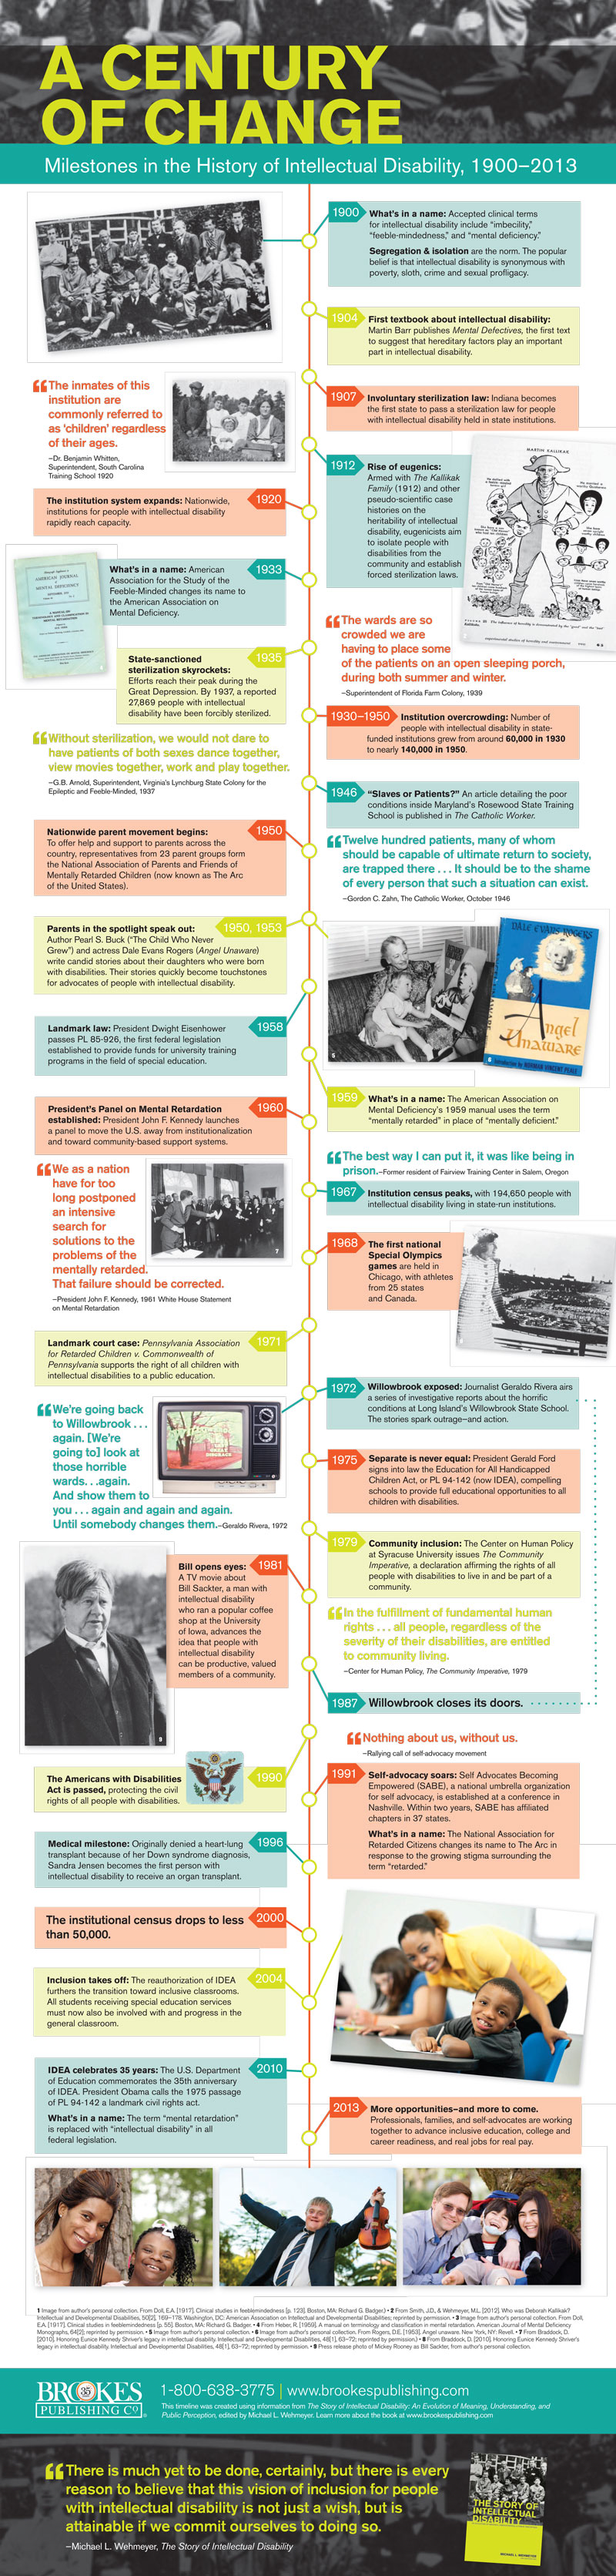 Milestones in the History of Intellectual Disability